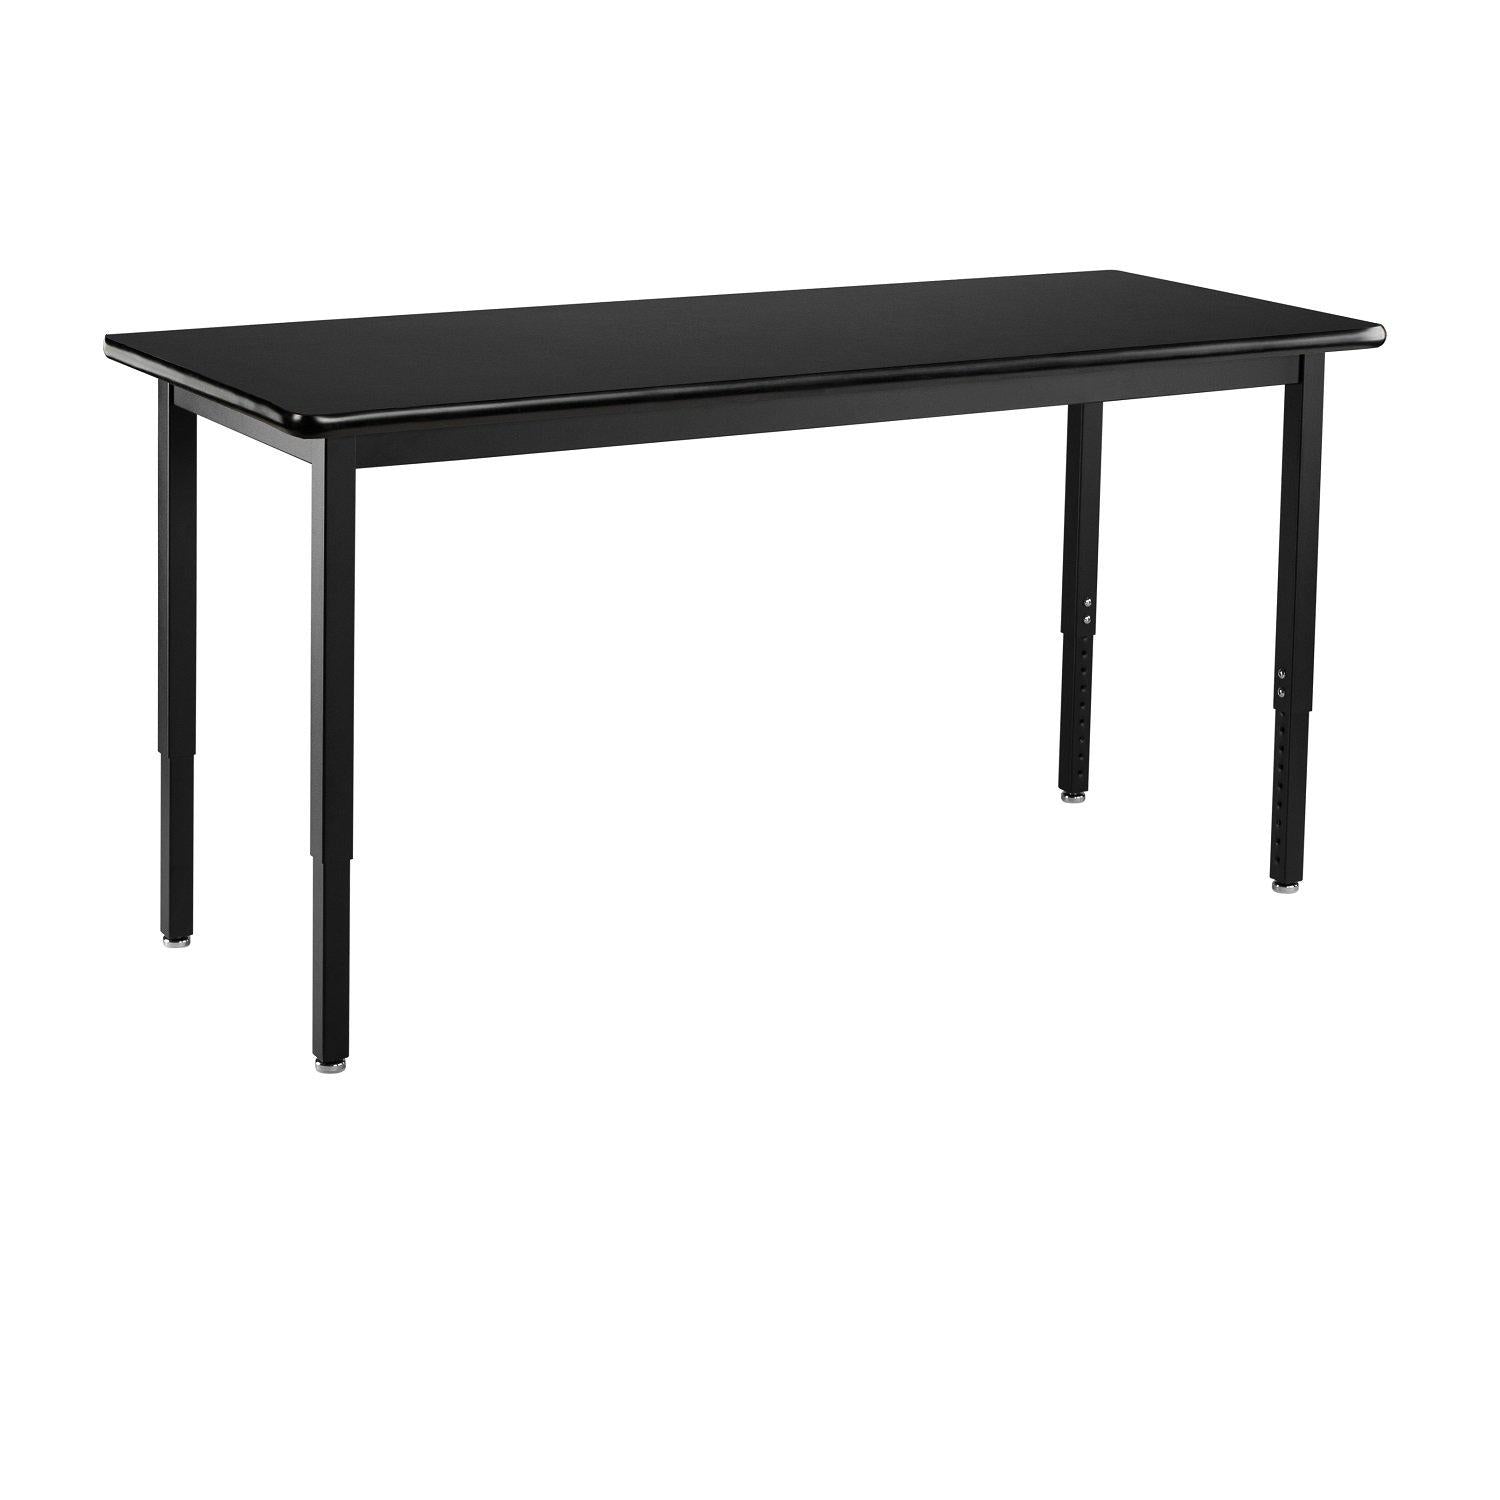 Heavy-Duty Height-Adjustable Utility Table, Black Frame, 24" x 60", High-Pressure Laminate Top with T-Mold Edge